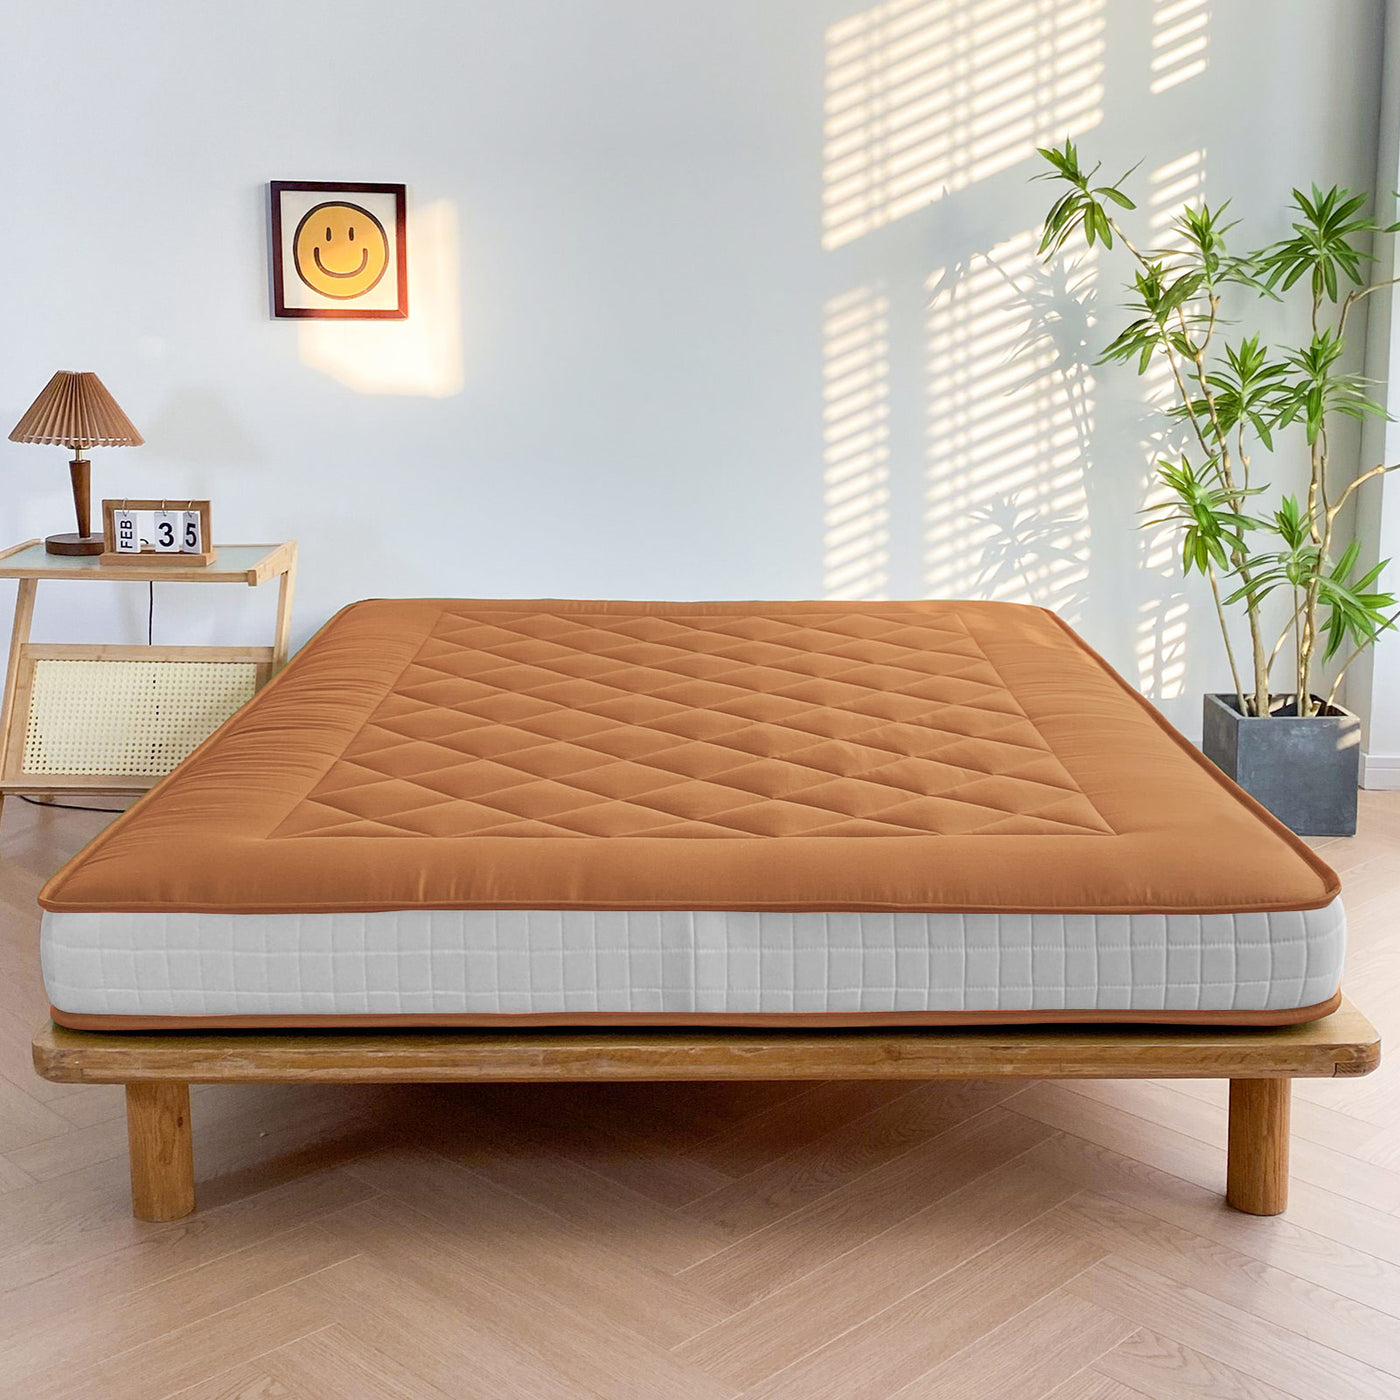 MAXYOYO 6" Extra Thick Japanese Futon Mattress, Stylish Diamond Quilting Floor Bed For Bedroom, Light Brown